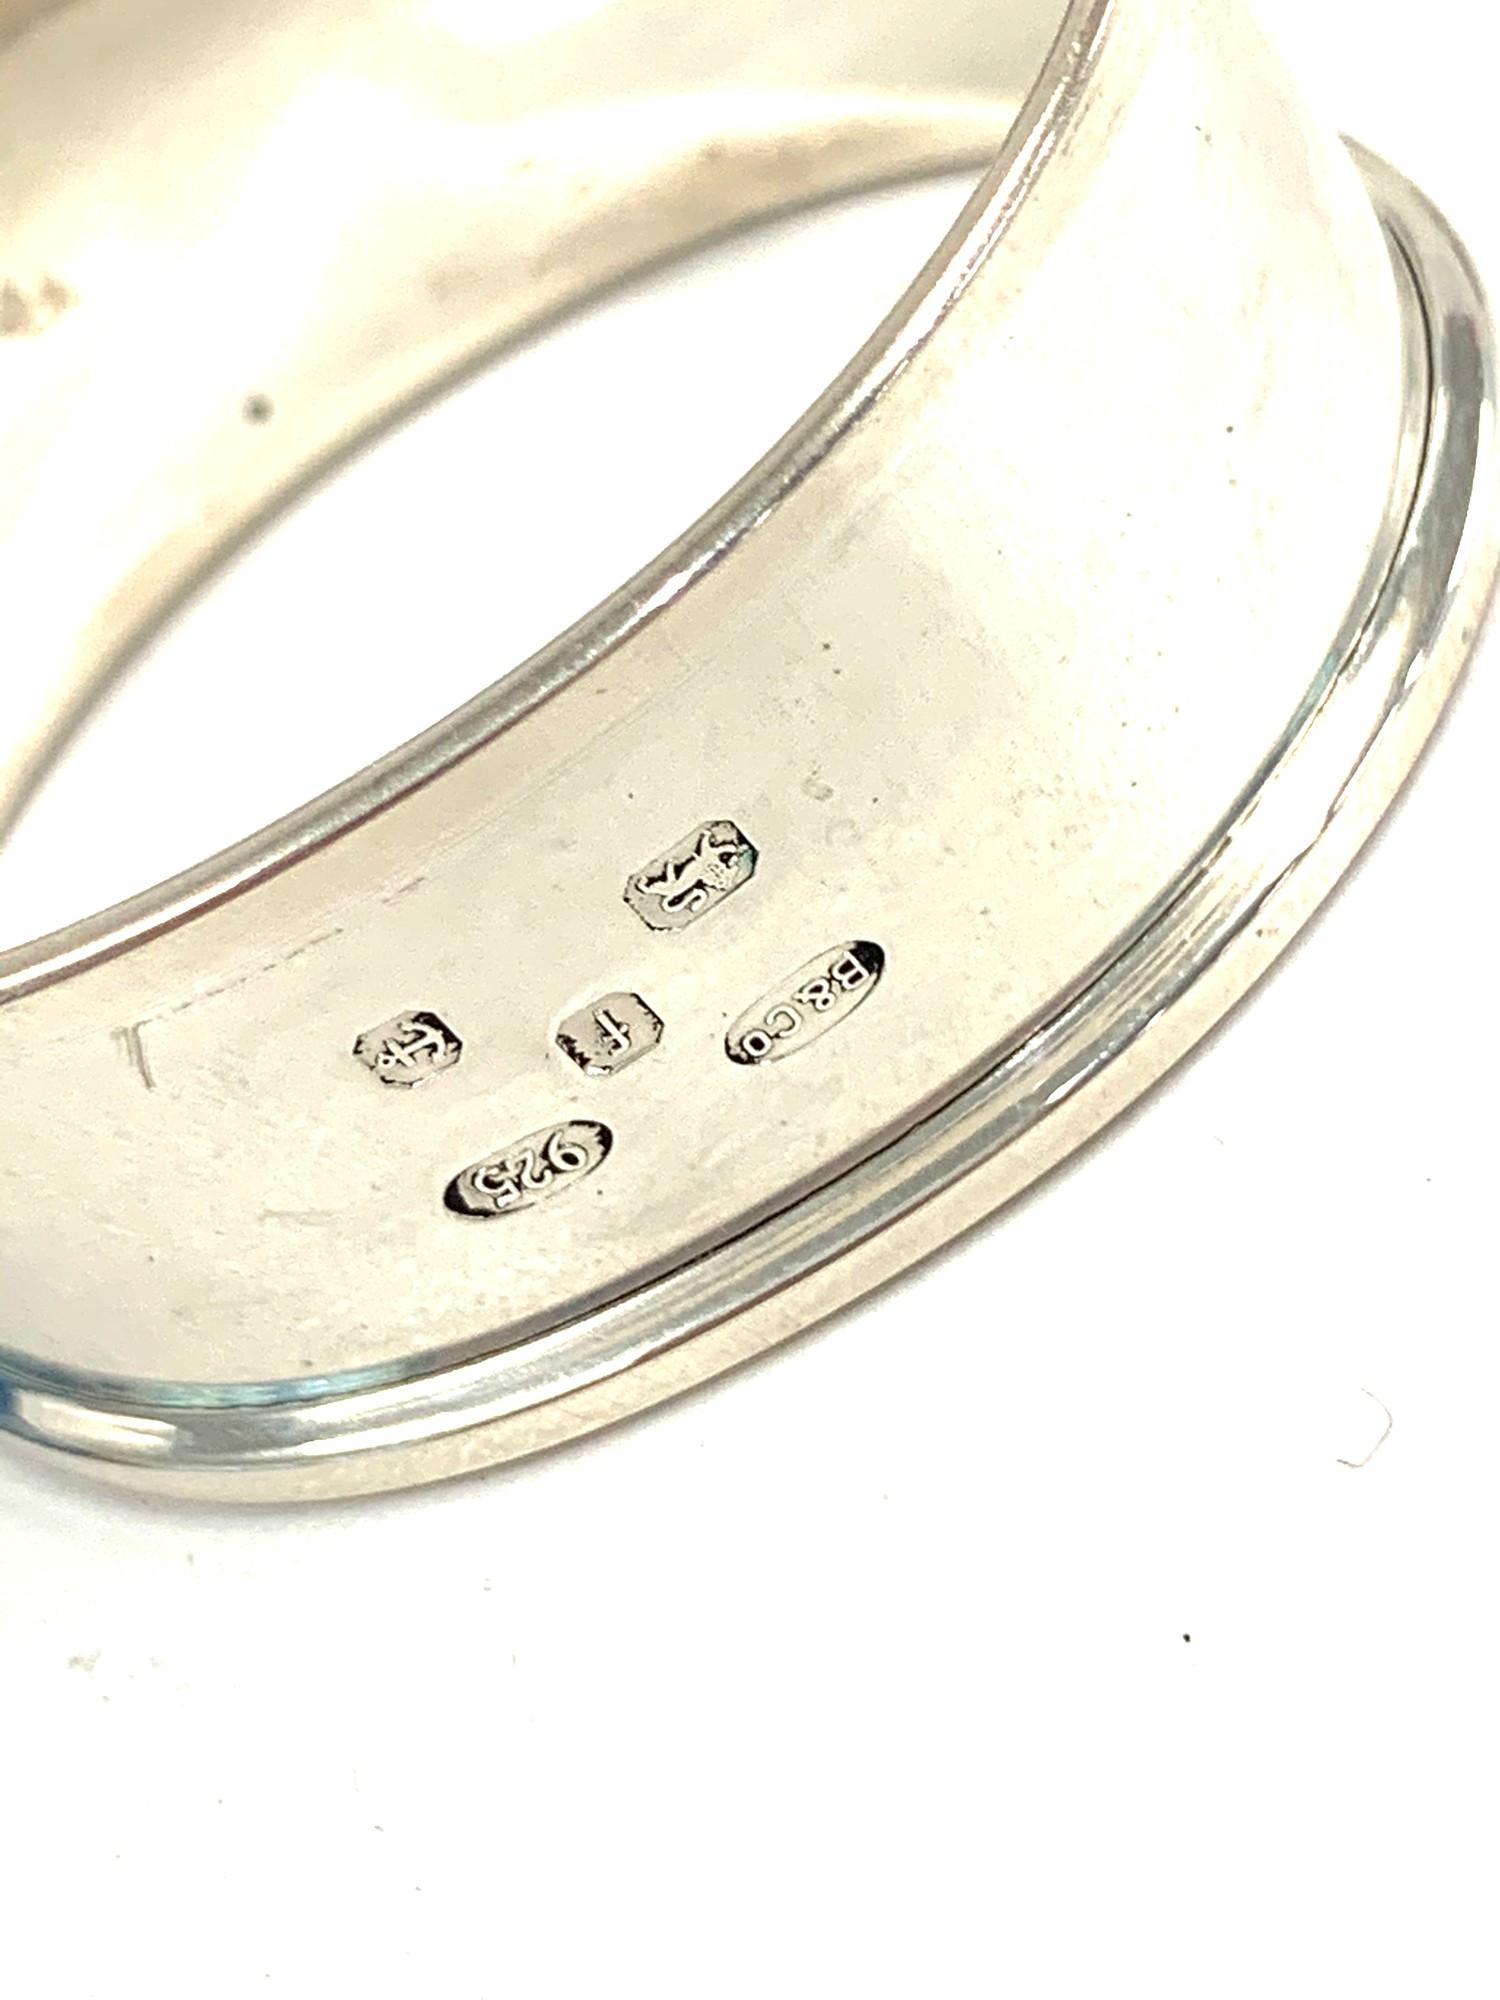 Set of 4 silver serviette rings - Image 2 of 2